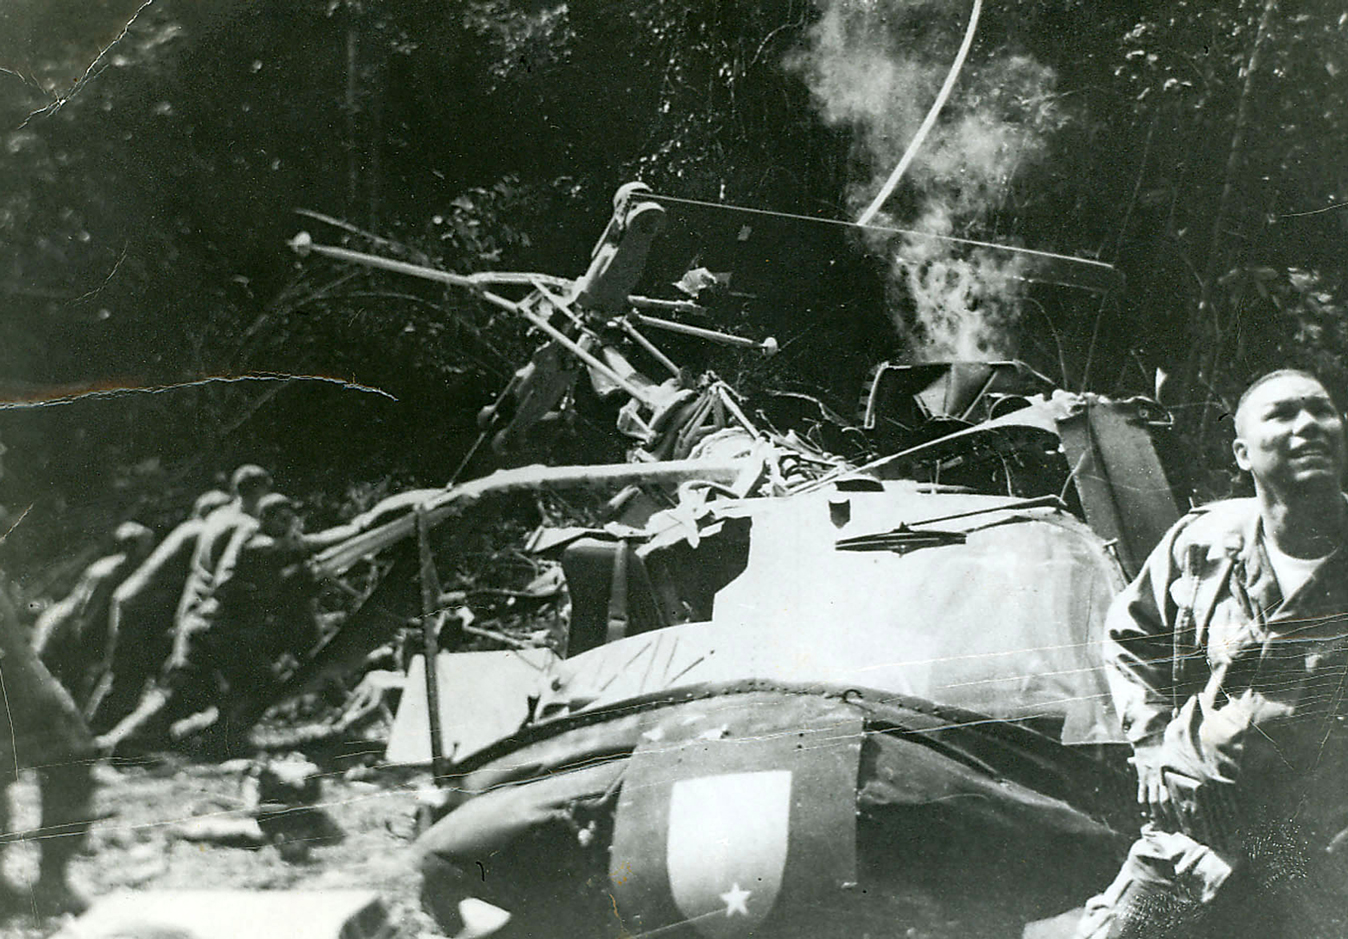 Colin in Vietnam with a helicopter after a crash-landing